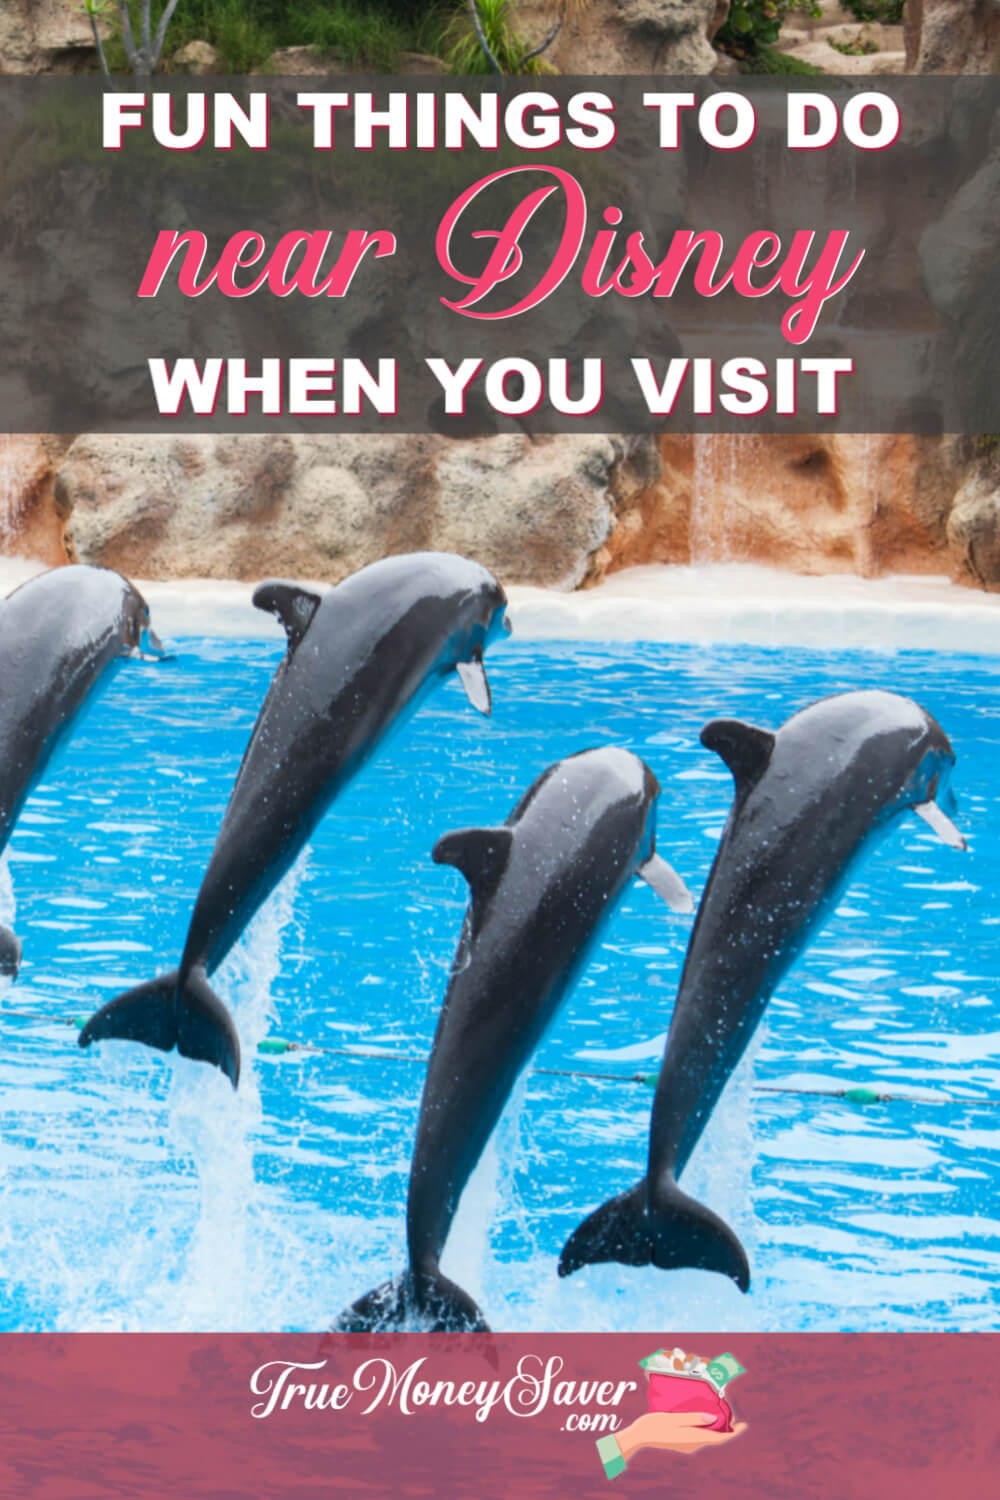 Other Fun Family Things To Do Near Disney When You Visit